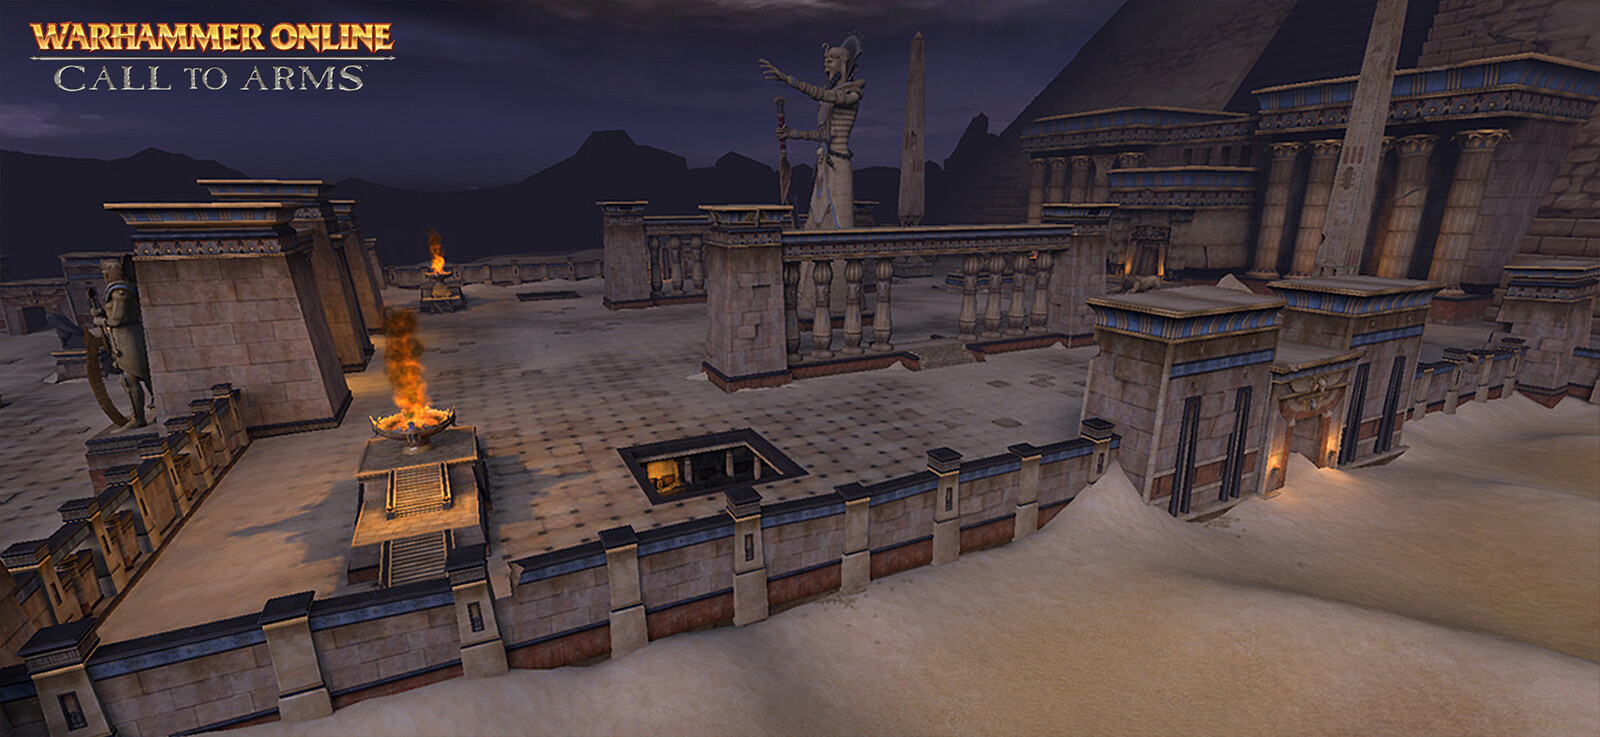 Main Causeway Area - Statues and Main Pyramid created by fellow artist. Responsible for a majority of the remaining assets in scene as well as layout and design of area.